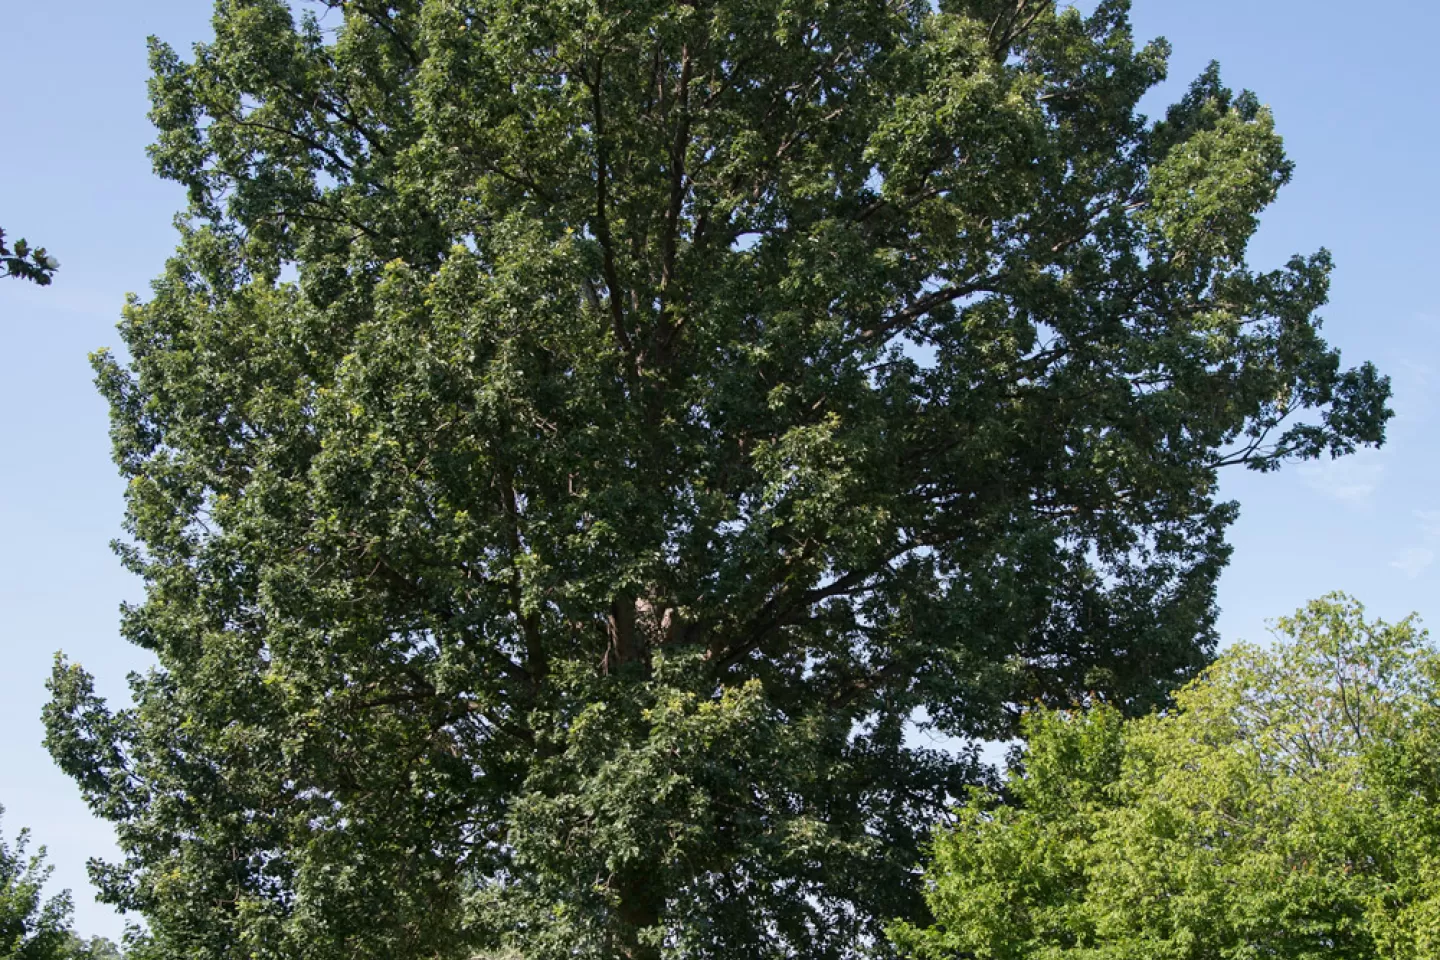 The Senator Thomas P. Gore tree on the U.S. Capitol Grounds during summer.